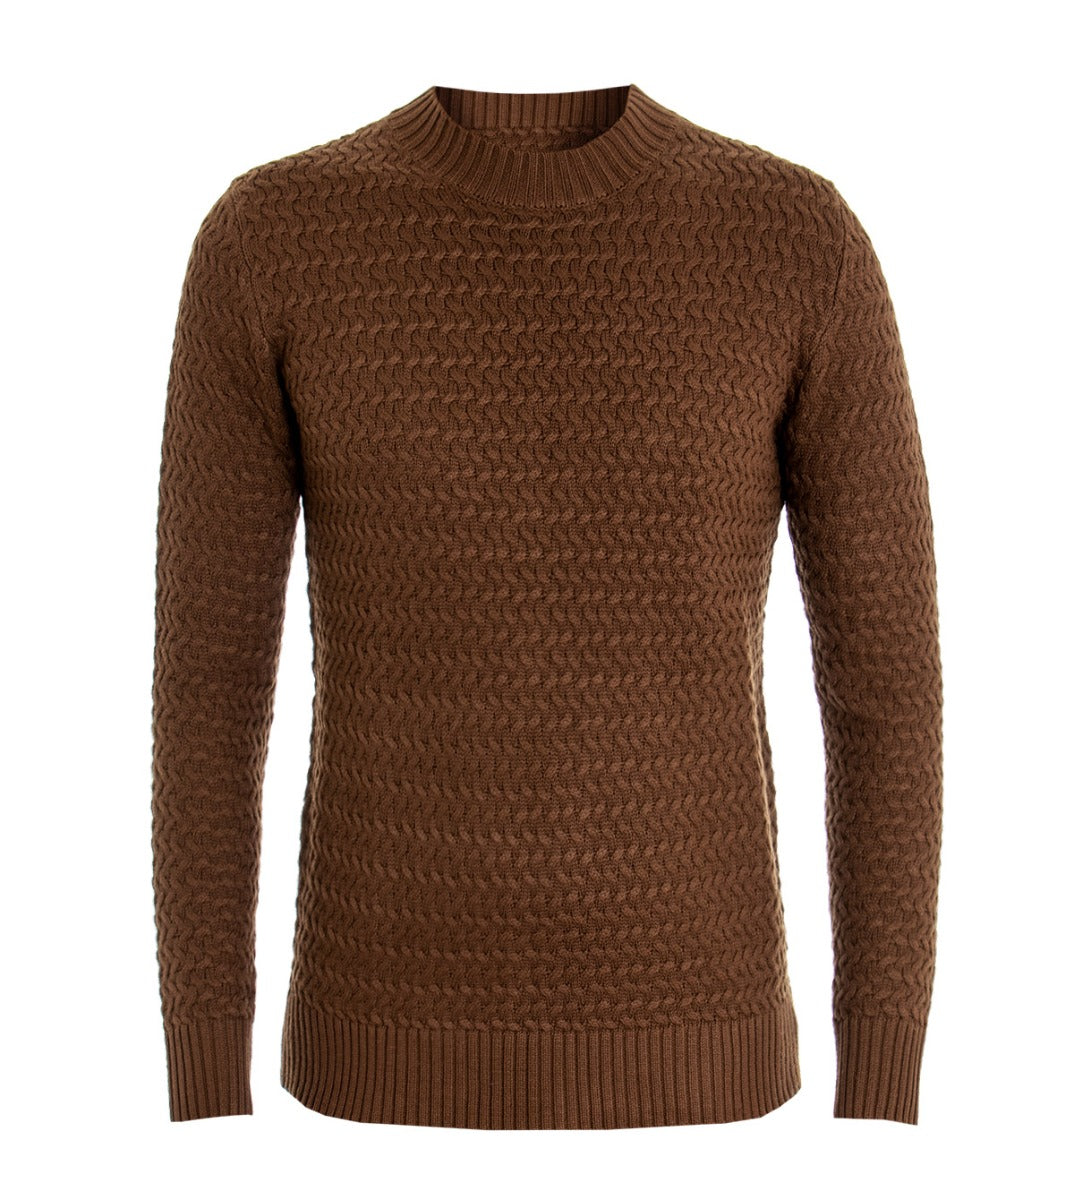 Men's Crew Neck Sweater Camel Woven Patterned Sweater Casual Long Sleeves GIOSAL